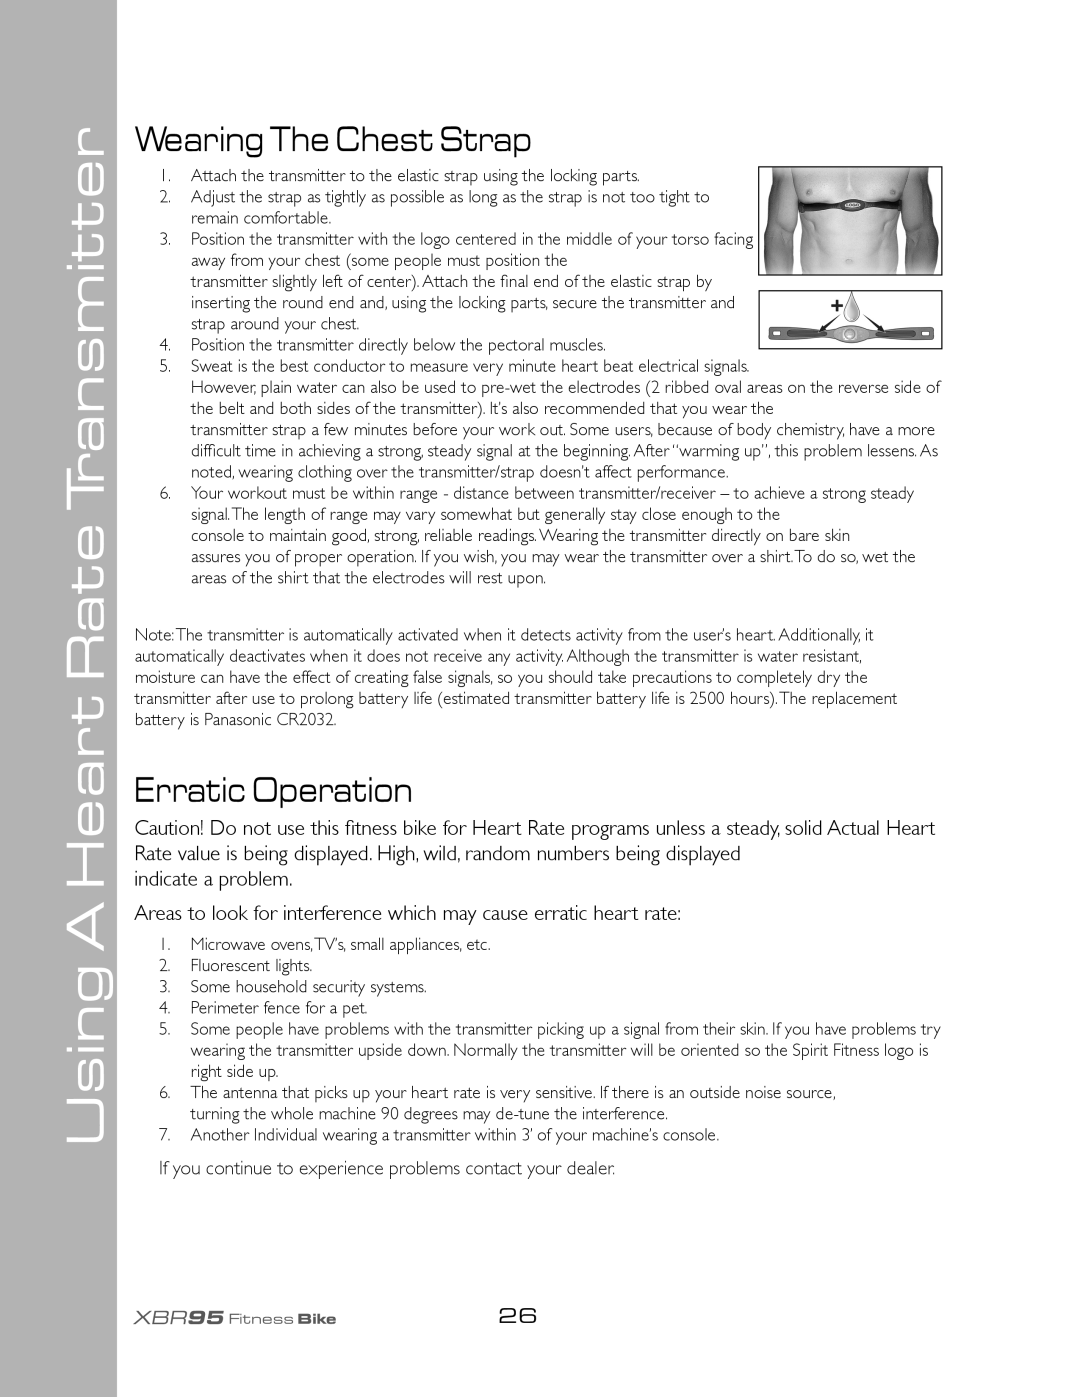 Spirit XBR95 owner manual Using A Heart Rate Transmitter, Wearing The Chest Strap, Erratic Operation 